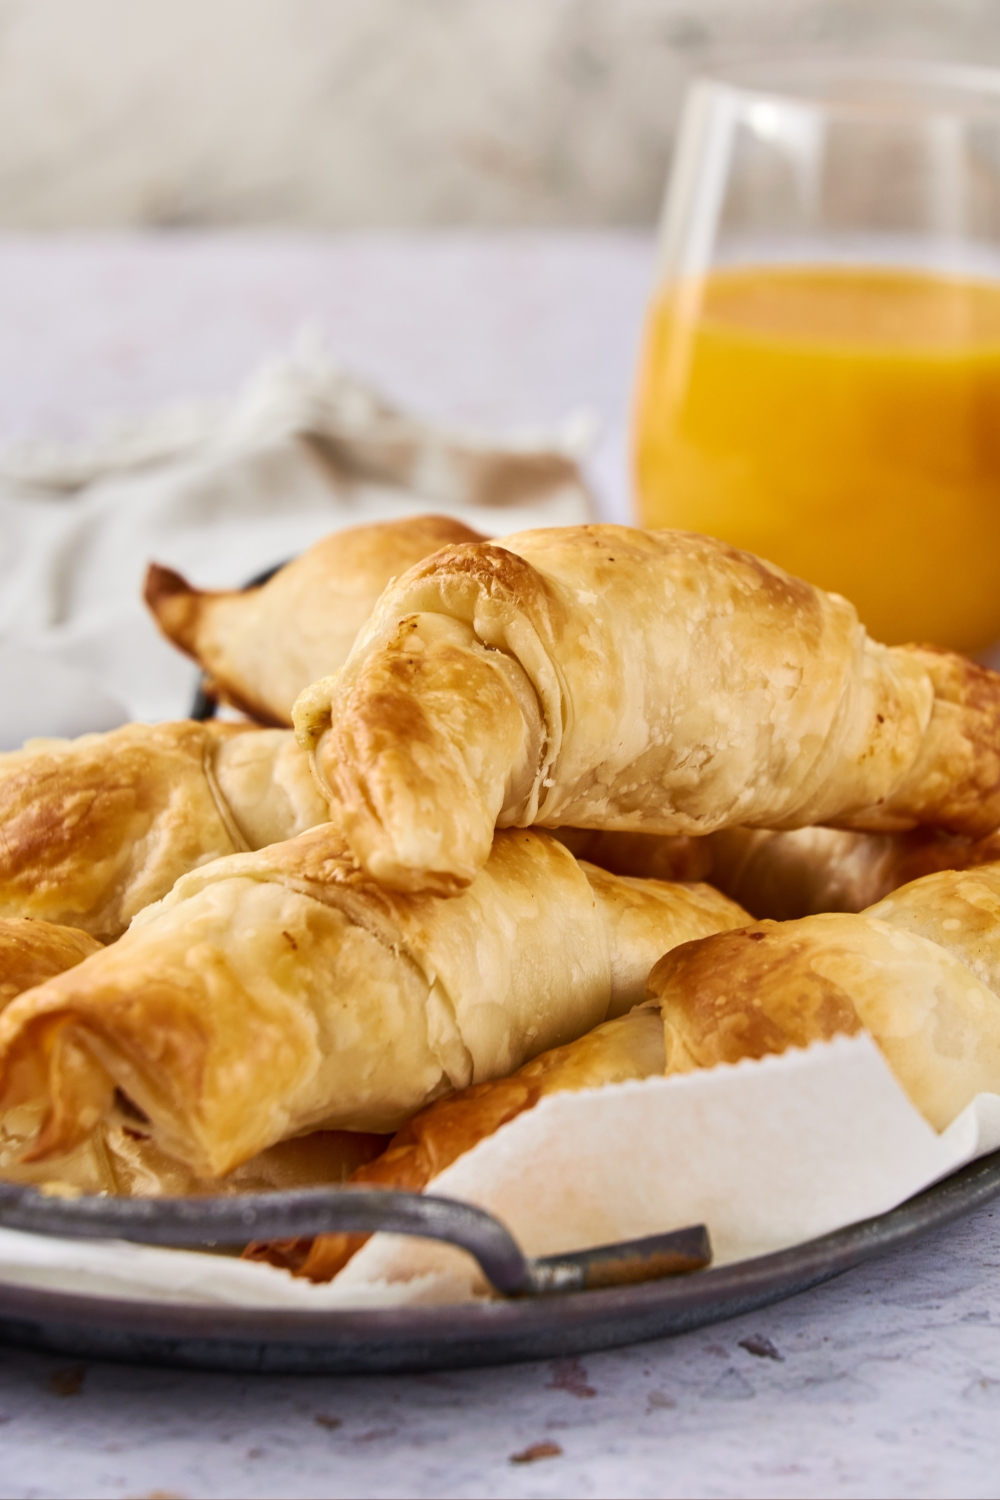 A platter of crescents piled high is on a white counter. A glass of orange juice is next to it.